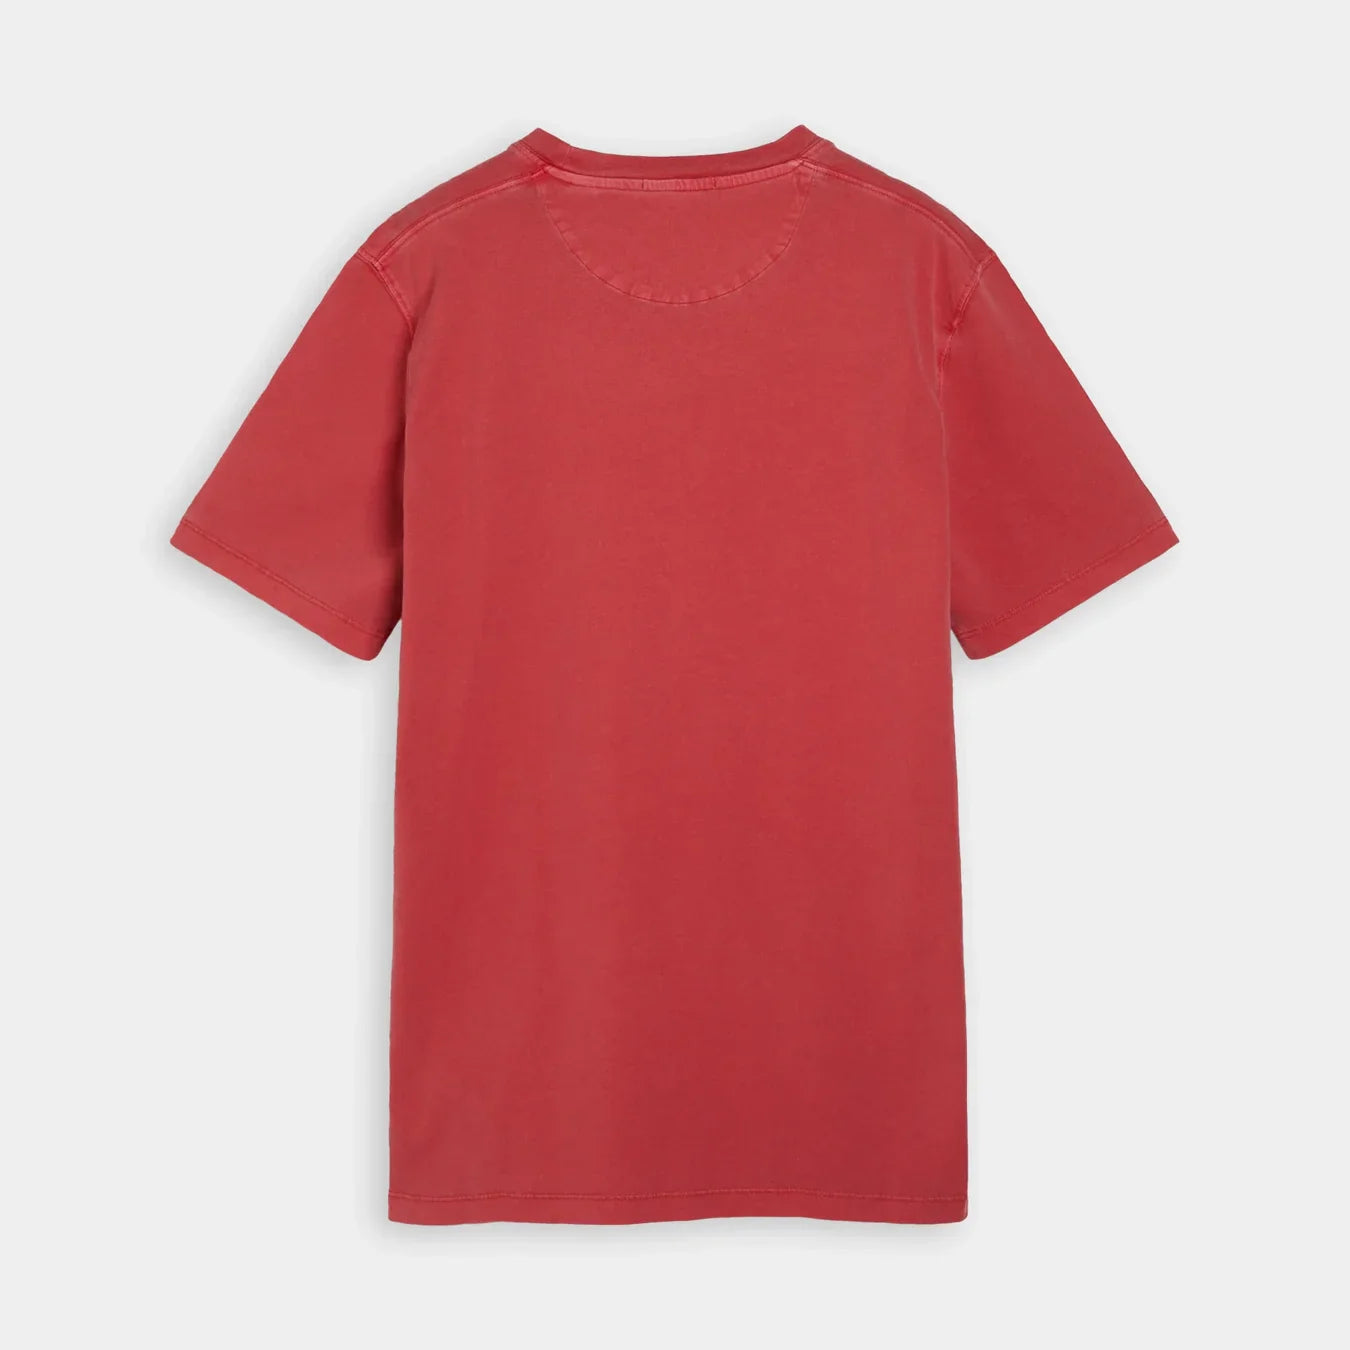 'Scotch & Soda Garment-Dyed Jersey T-Shirt' in 'Amp Red' colour